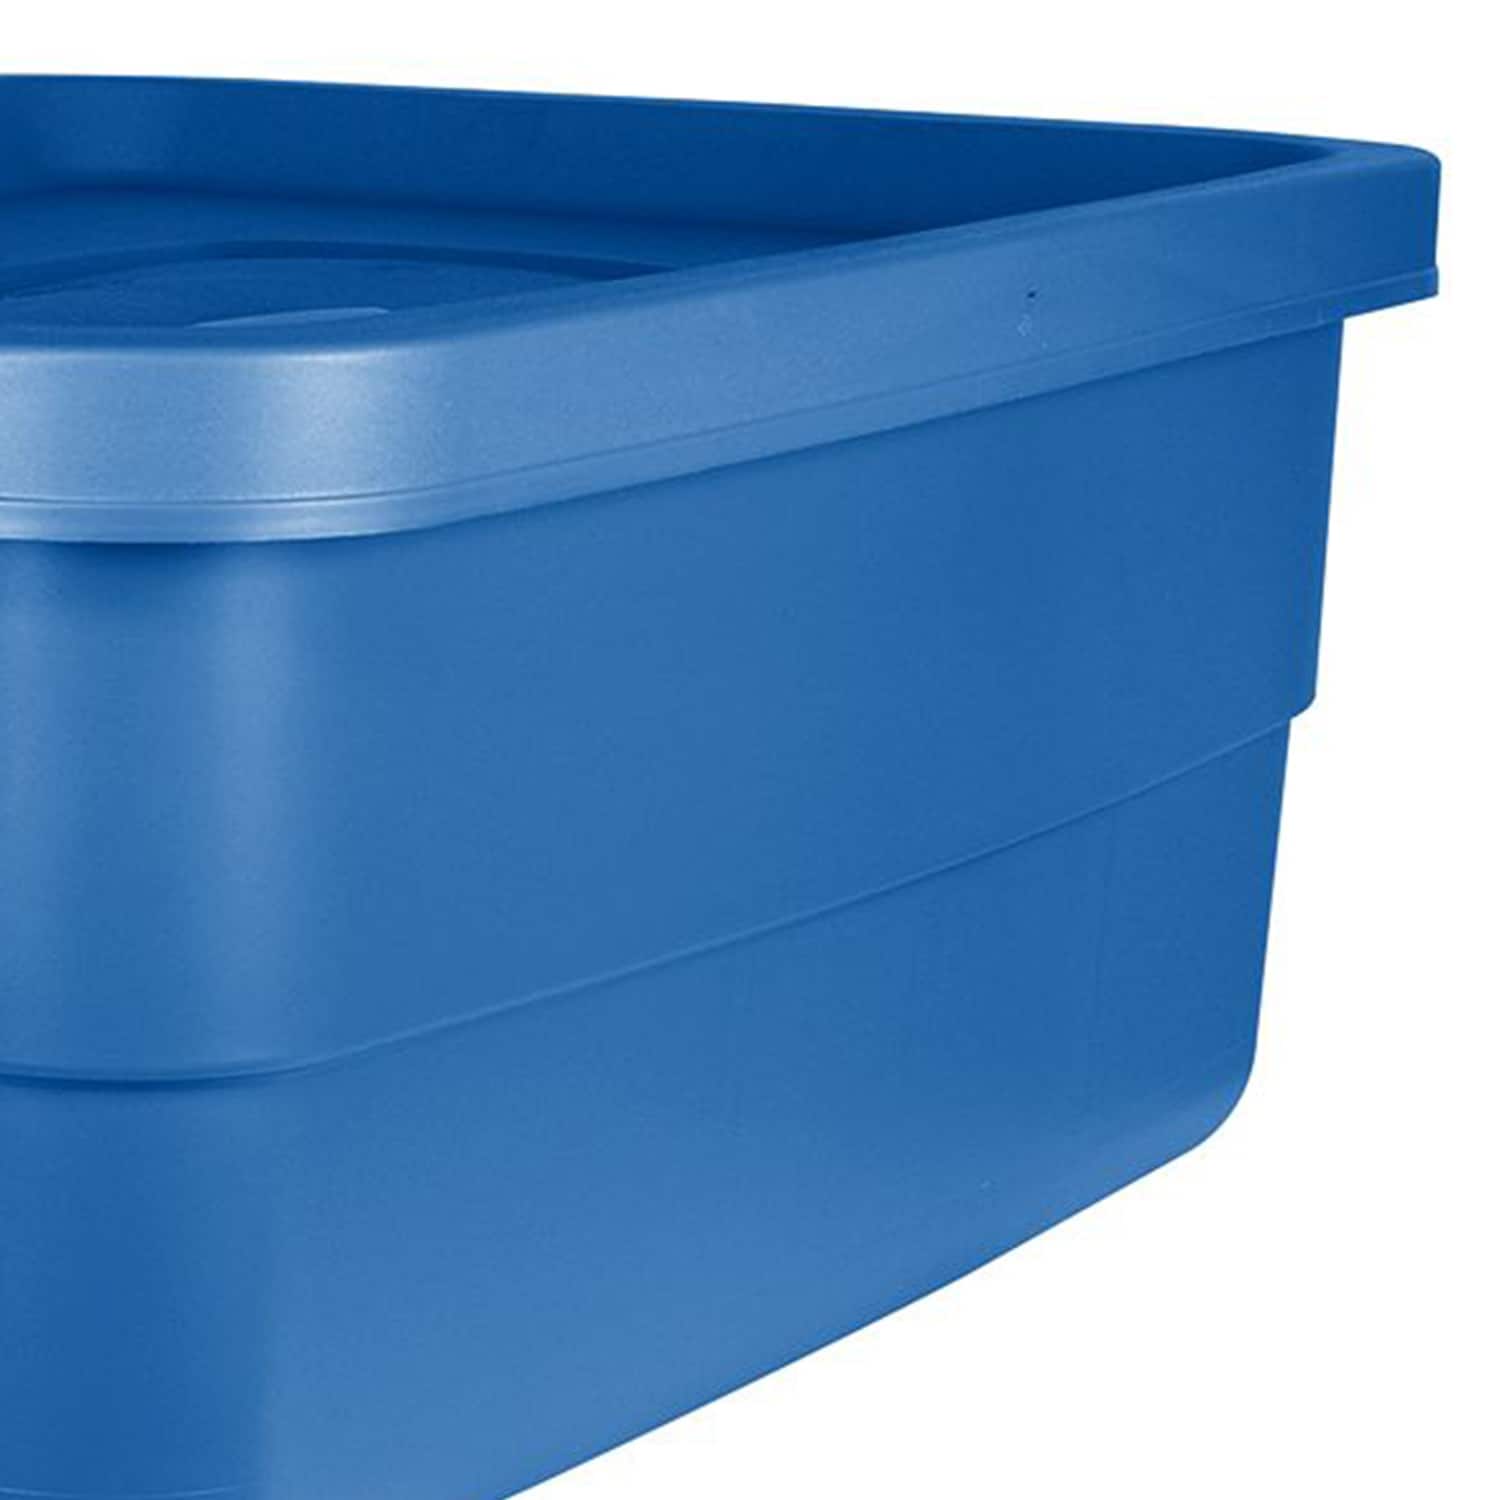 https://ak1.ostkcdn.com/images/products/is/images/direct/7808f5e04a0c6b5457b398e99ede4204adf867fa/Rubbermaid-Roughneck-Tote-10-Gallon-Storage-Container%2C-Heritage-Blue-%286-Pack%29.jpg